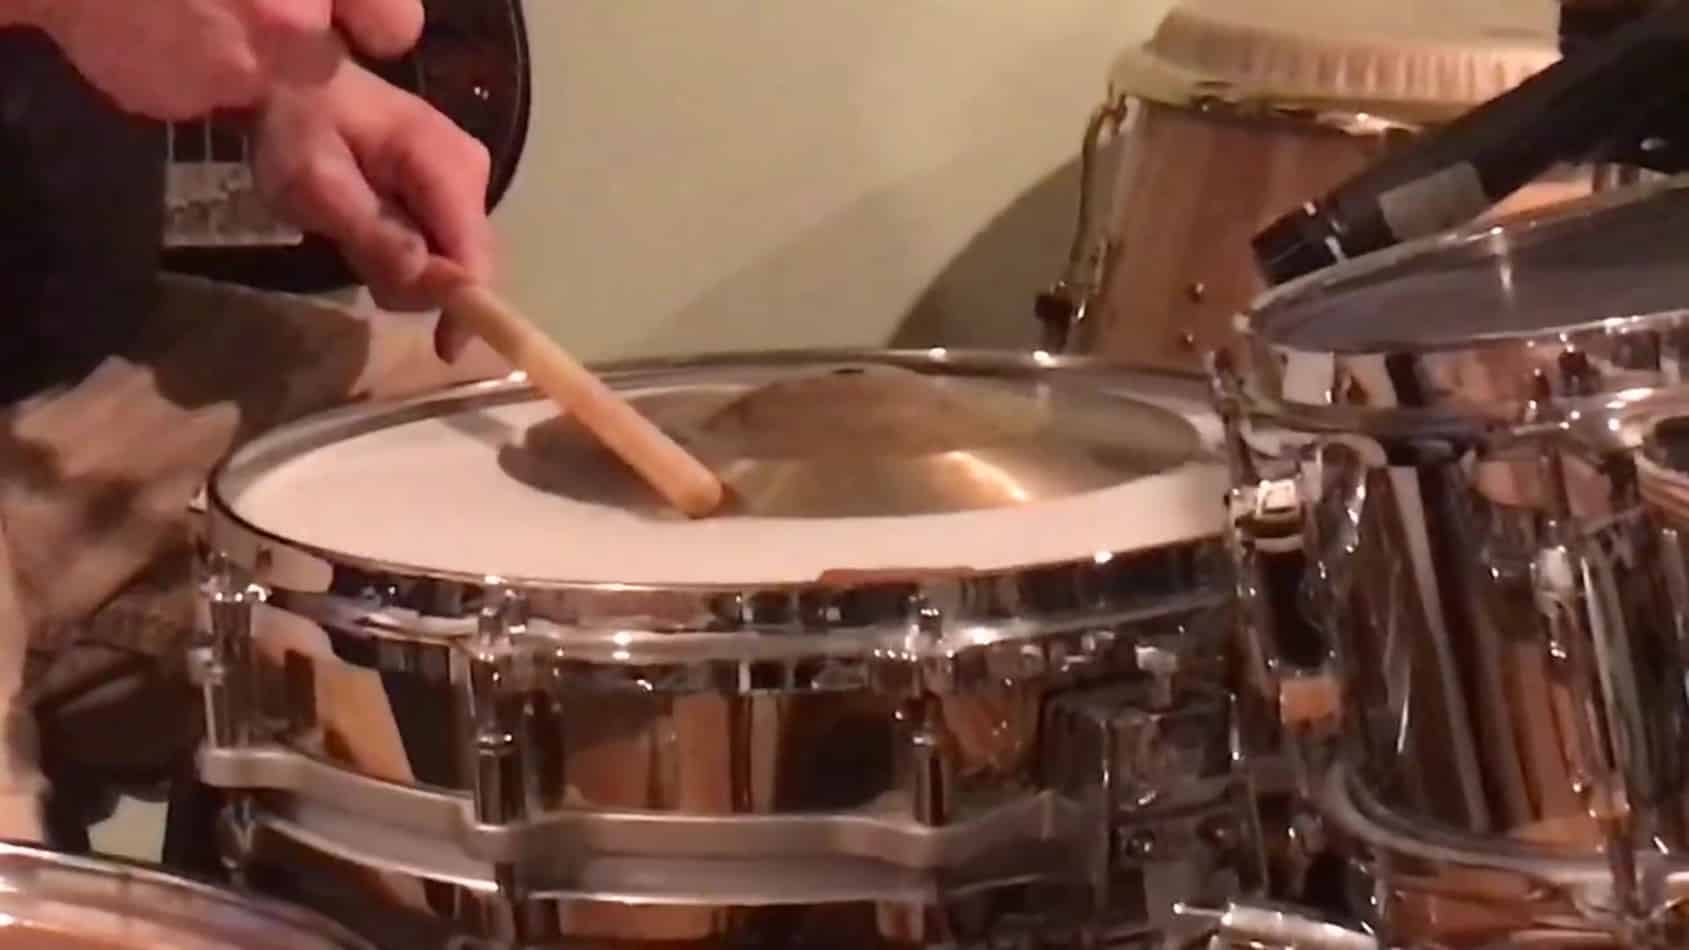 snare drum with splash cymbal on batter head being struck with a drum stick